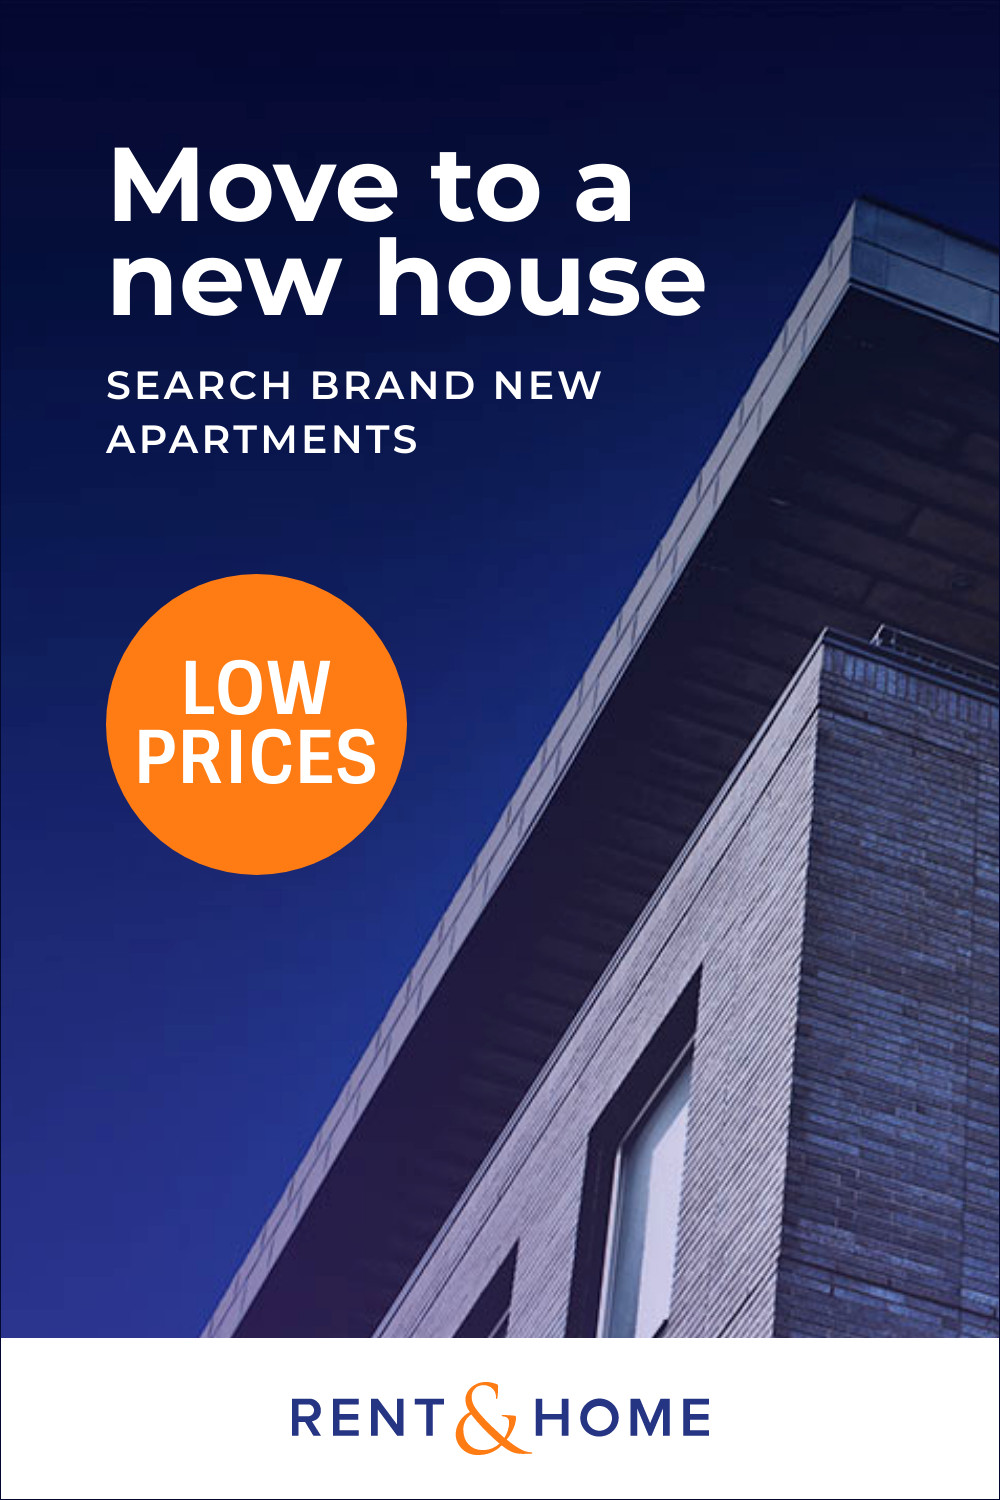 Search Brand New Apartments